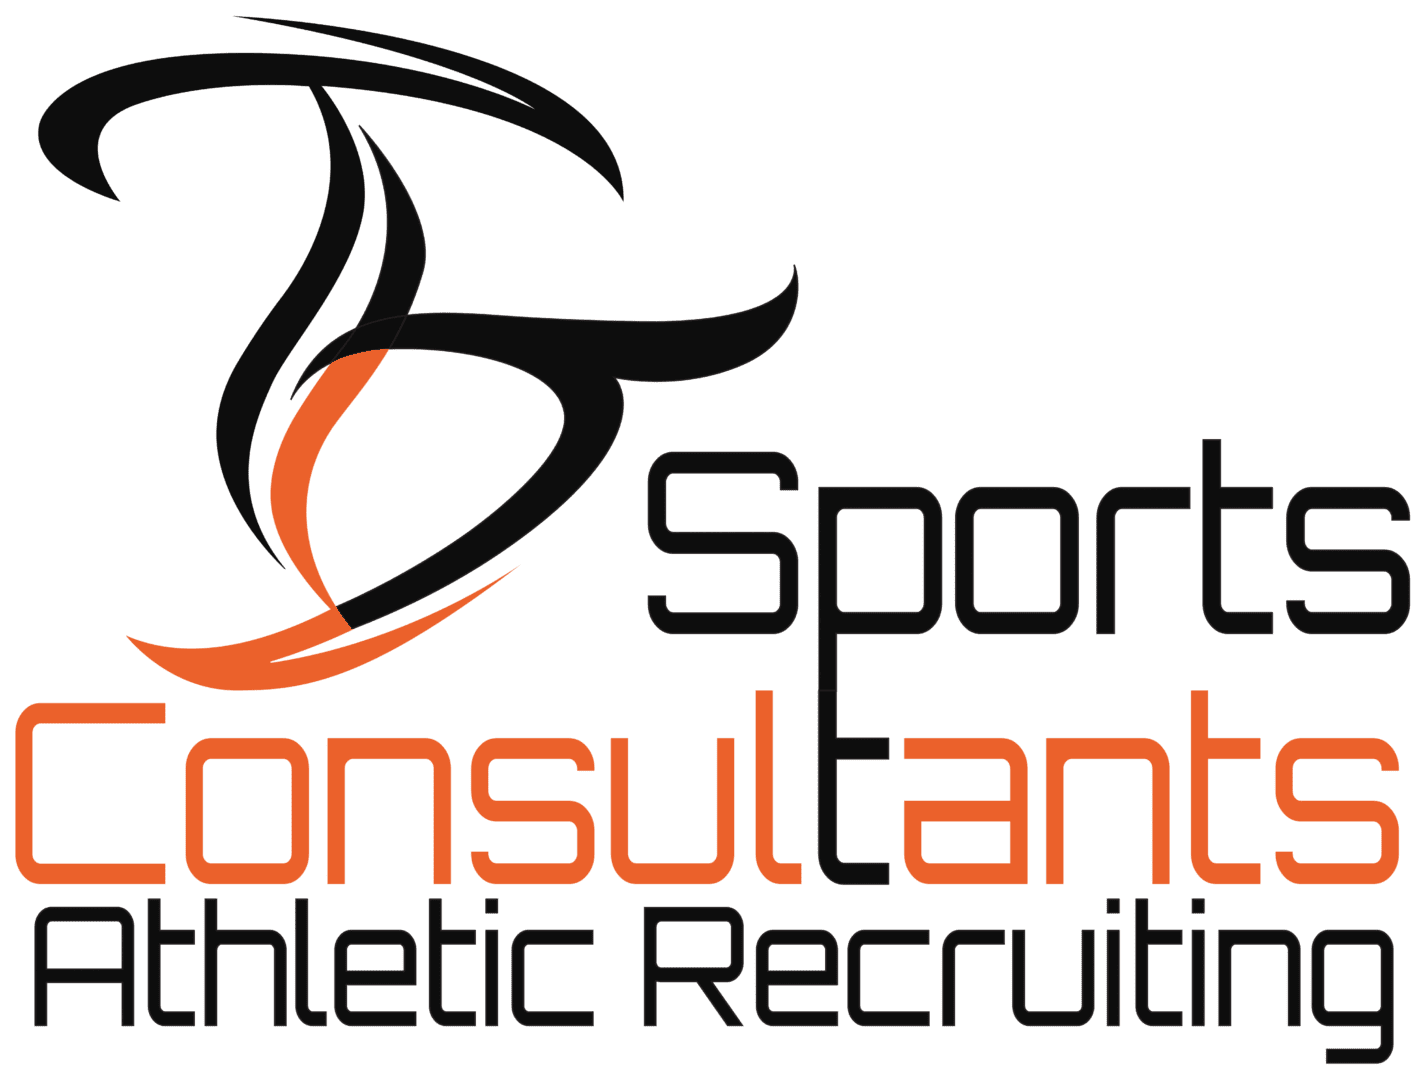 TJ Sports Consultants Athletic Recruiting